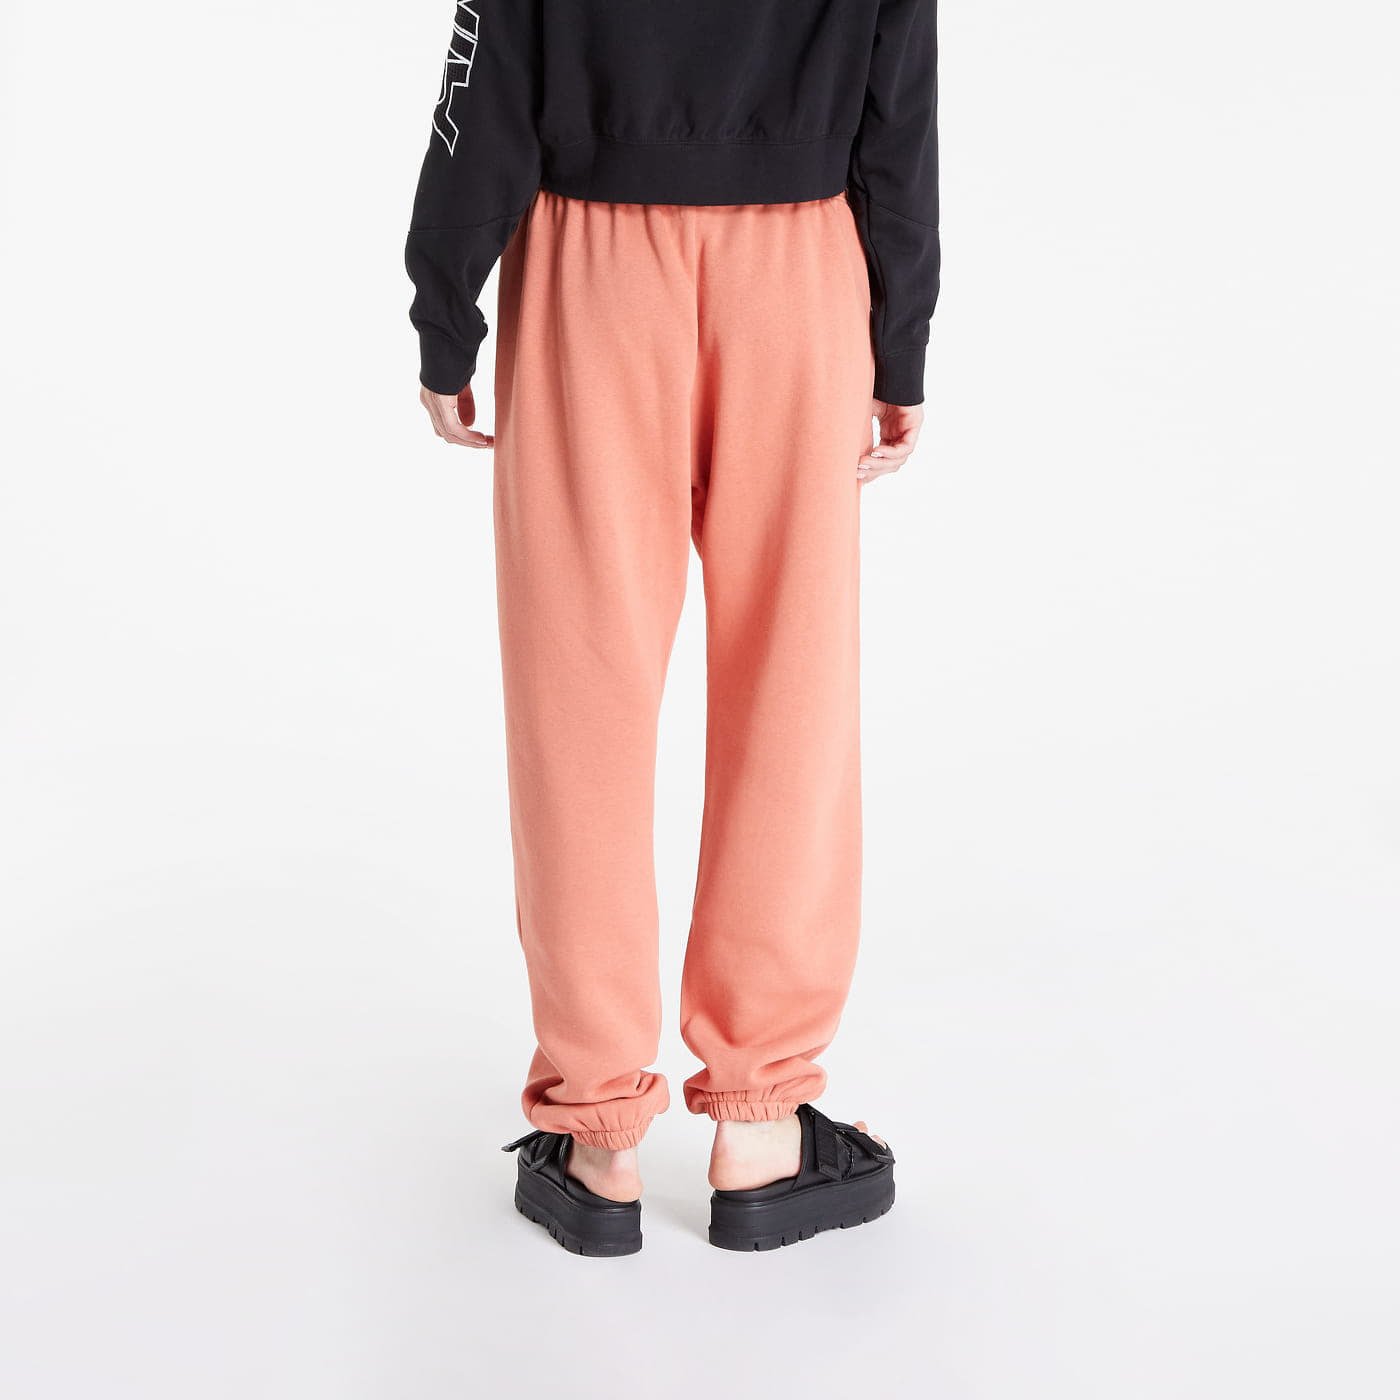 Sportswear Essential Collection Pants